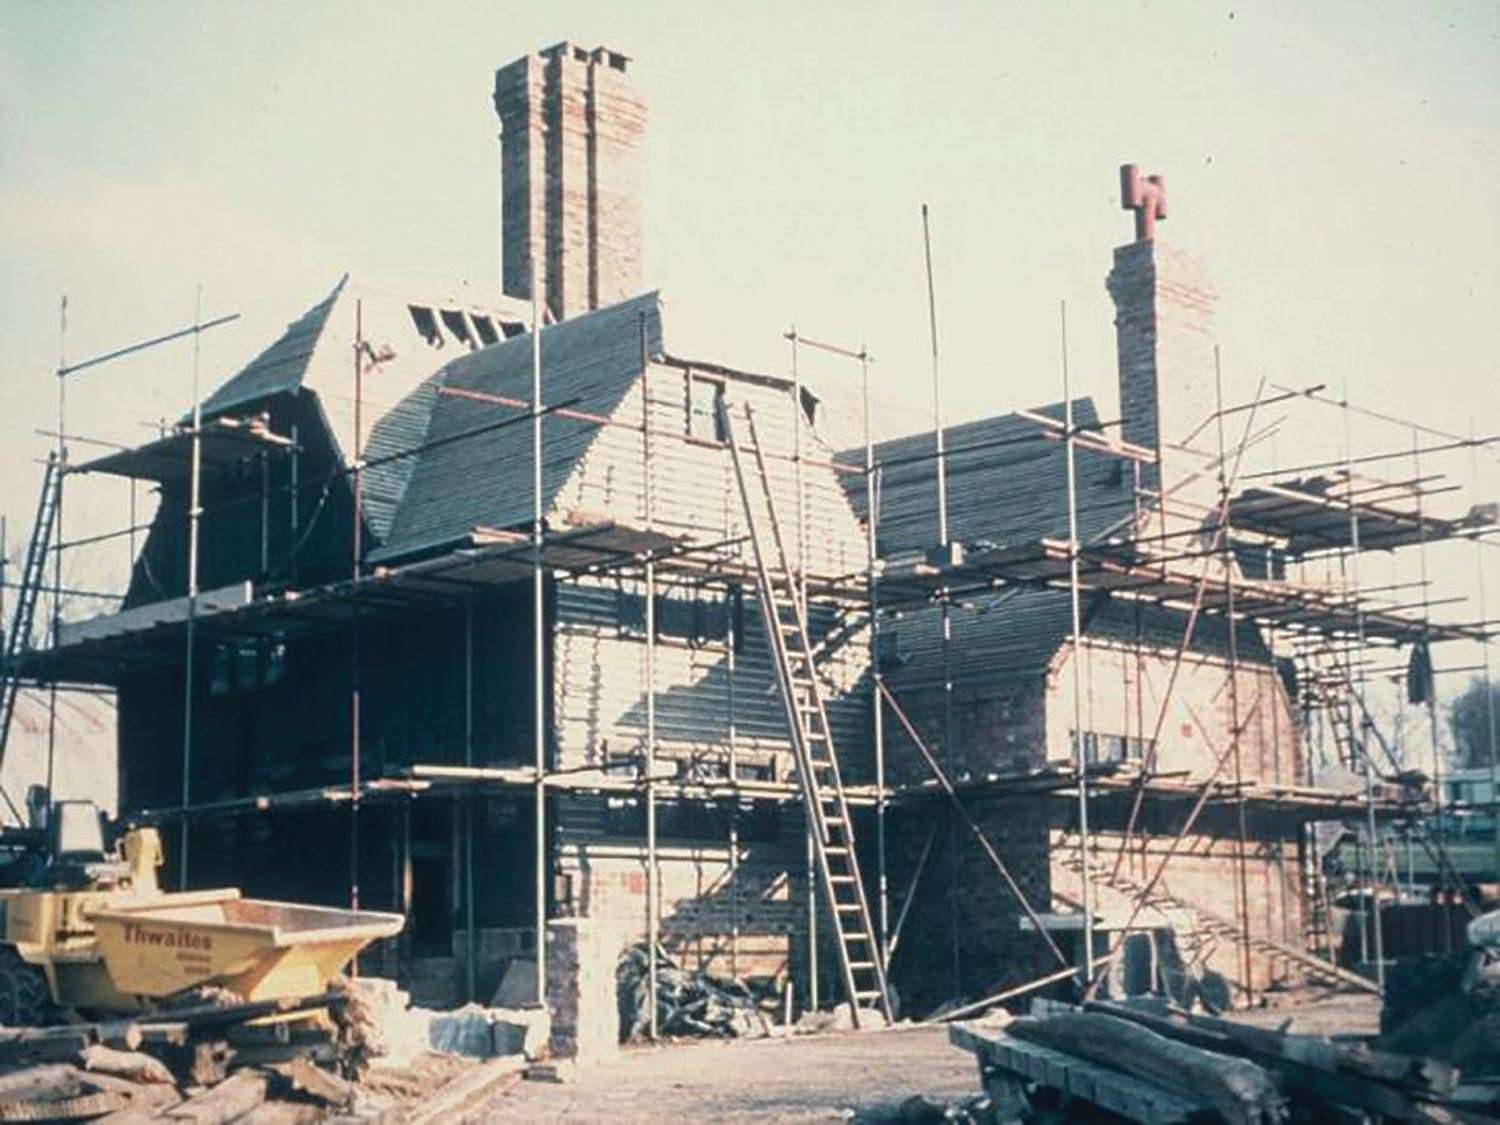 Dunsters Millhouse being dismantled in 1973